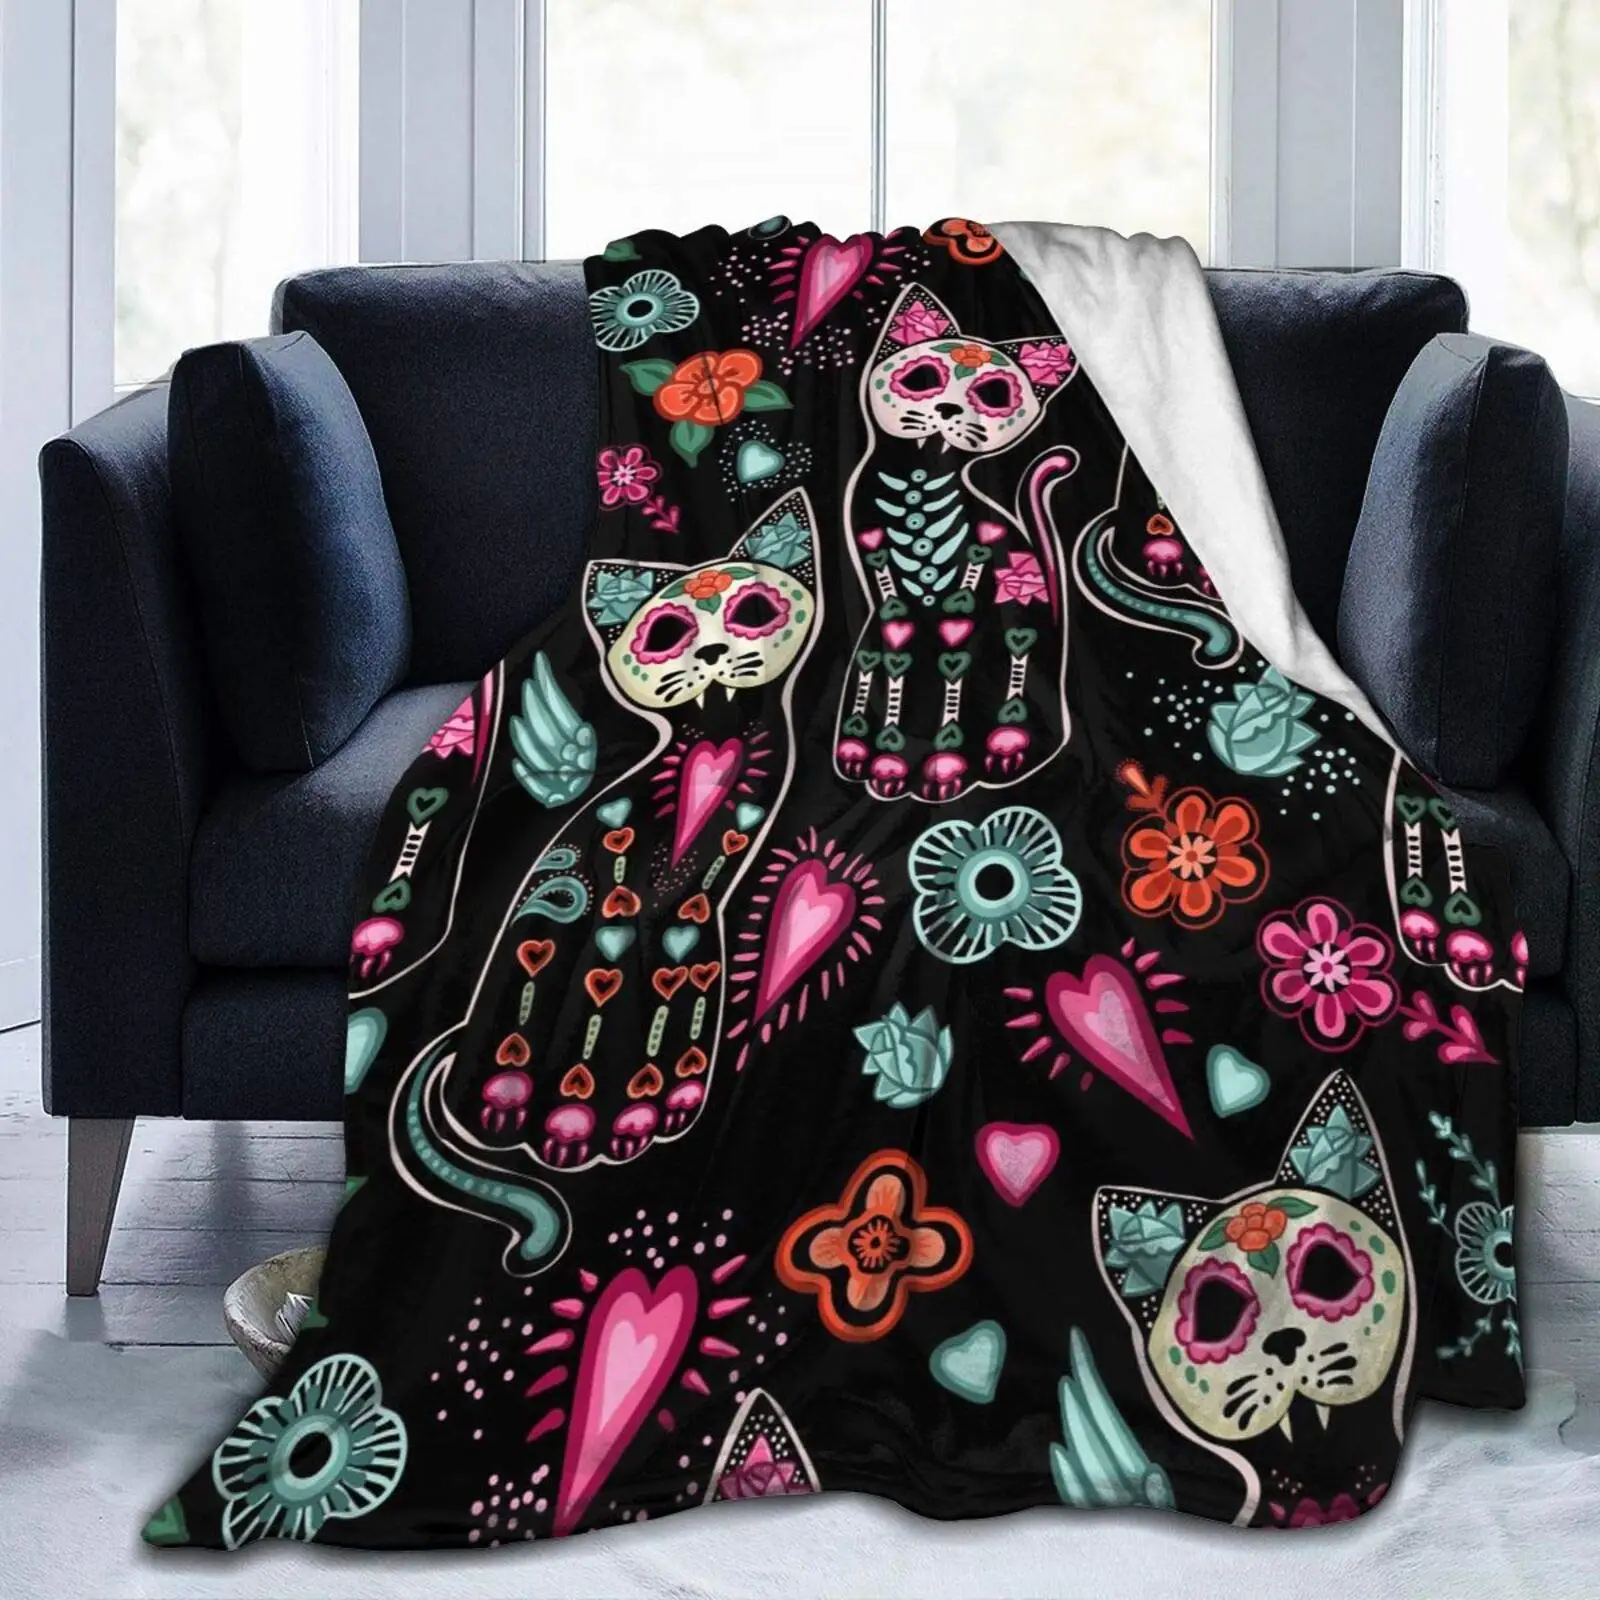 

Halloween Blanket Gifts,Day of The Dead Cat Kitten Sugar Skull Throw Blanket Soft Lightweight Flannel Blanket for Bed Sofa Couch